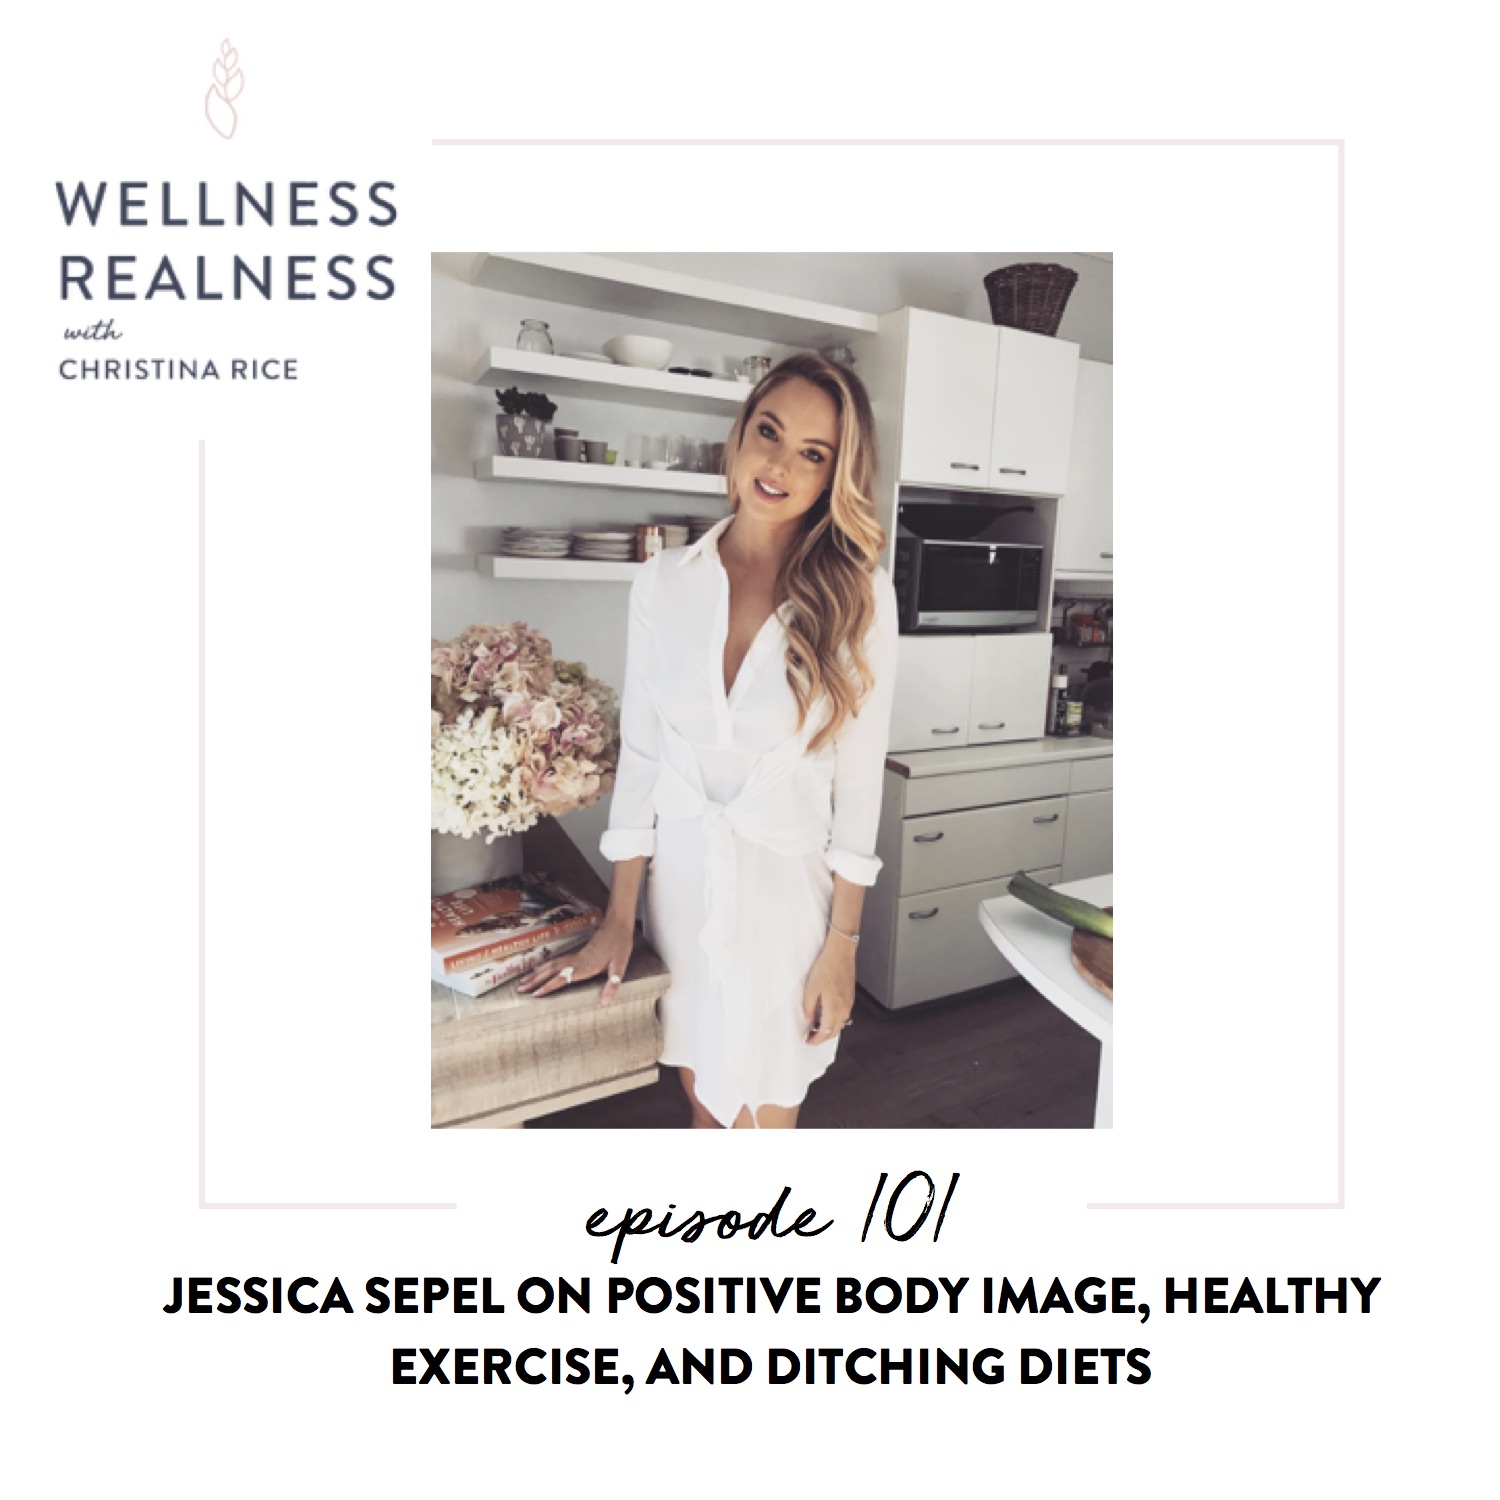 101: Jessica Sepel on Positive Body Image, Healthy Exercise, and Ditching Diets